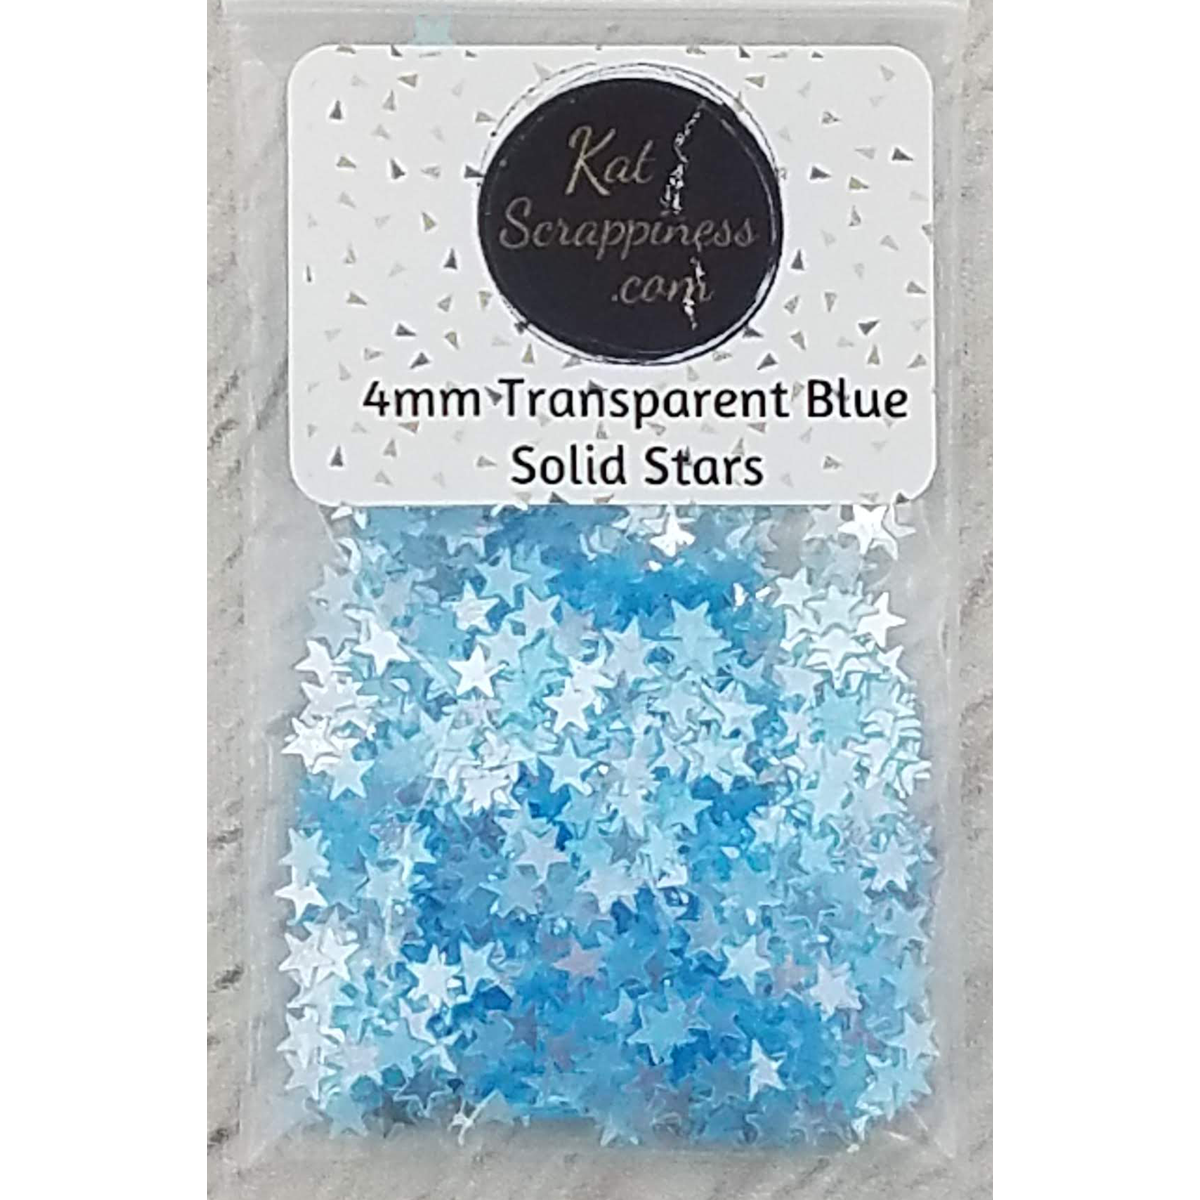 4mm Transparent Blue Solid Star Confetti - Sequins - Kat Scrappiness